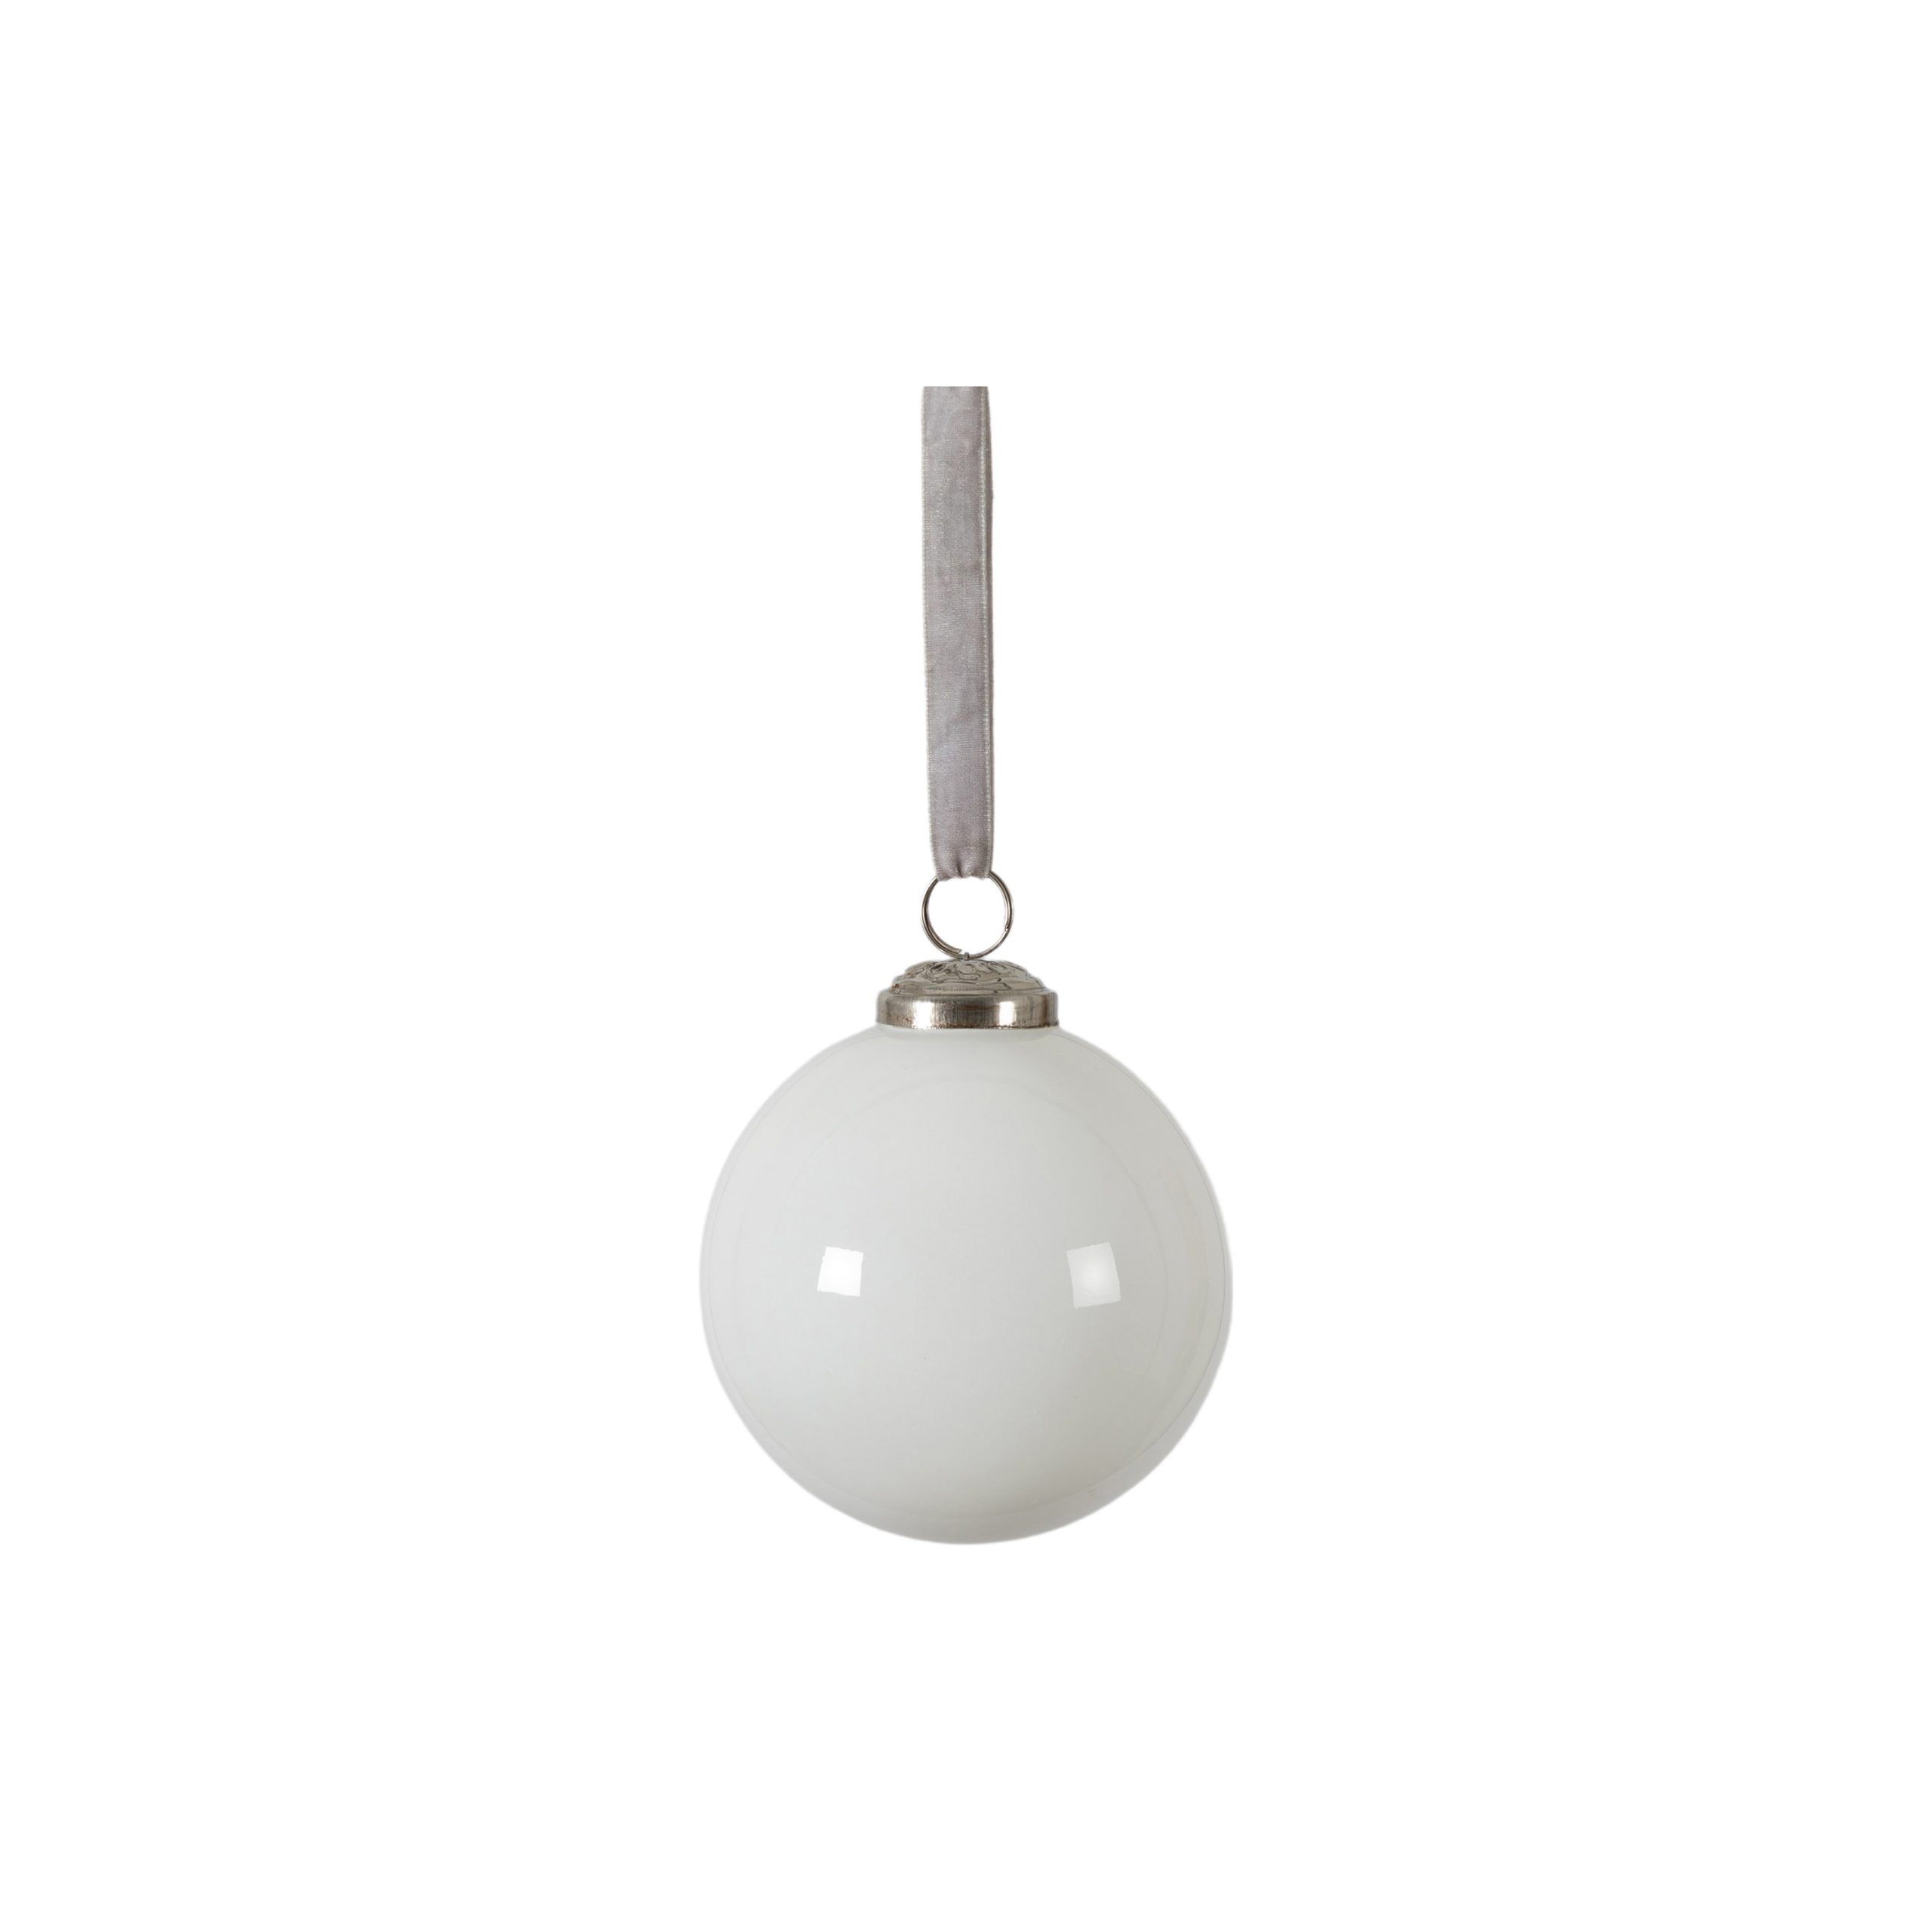 Gallery Direct Lunar Assorted Bauble White (Set of 6)